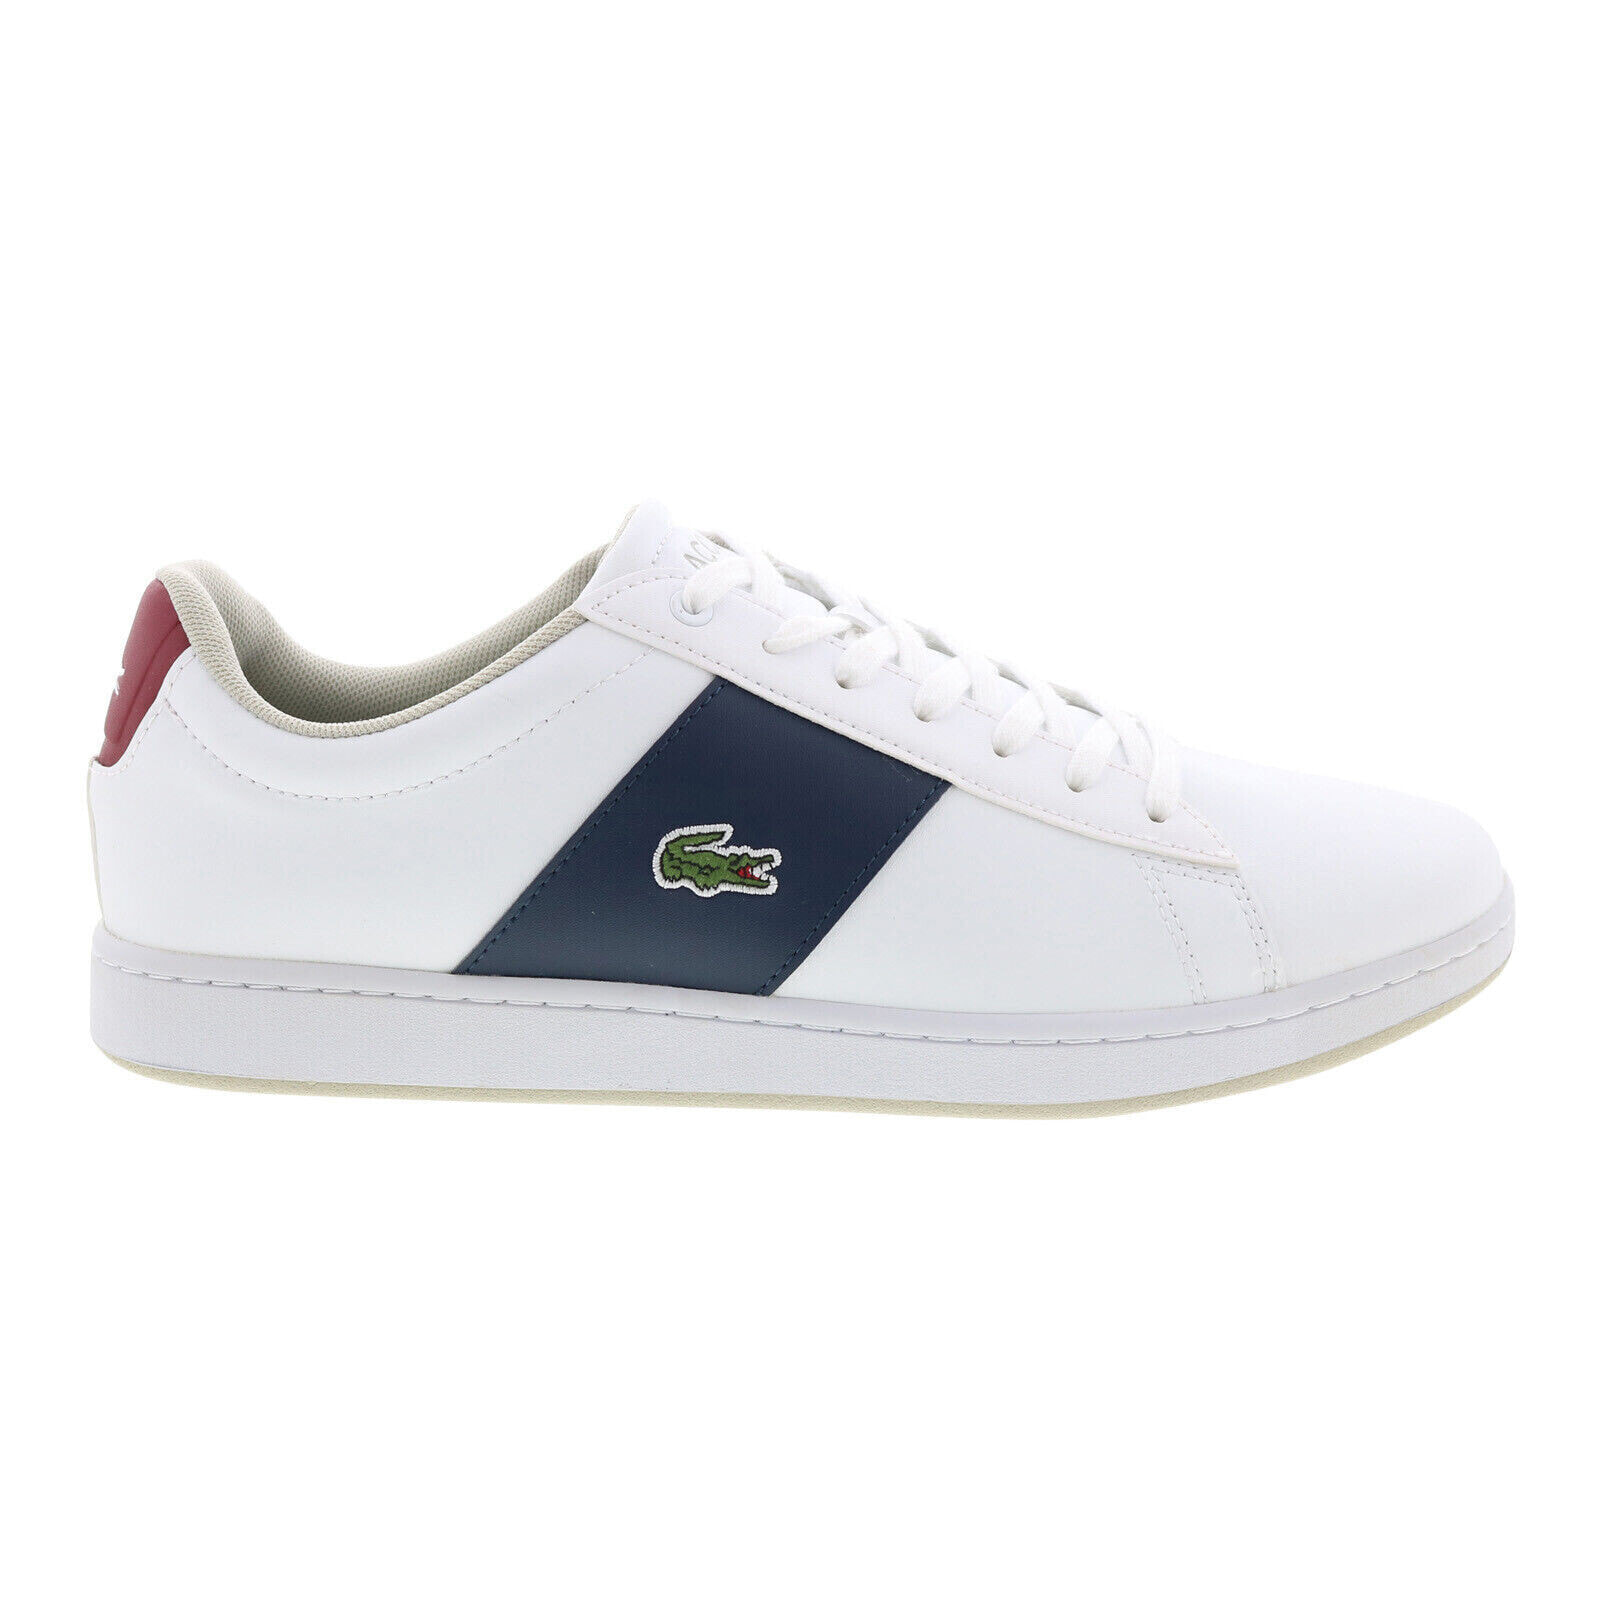 Lacoste Carnaby EVO CGR 2225 Mens White Leather Lifestyle Sneakers Shoes